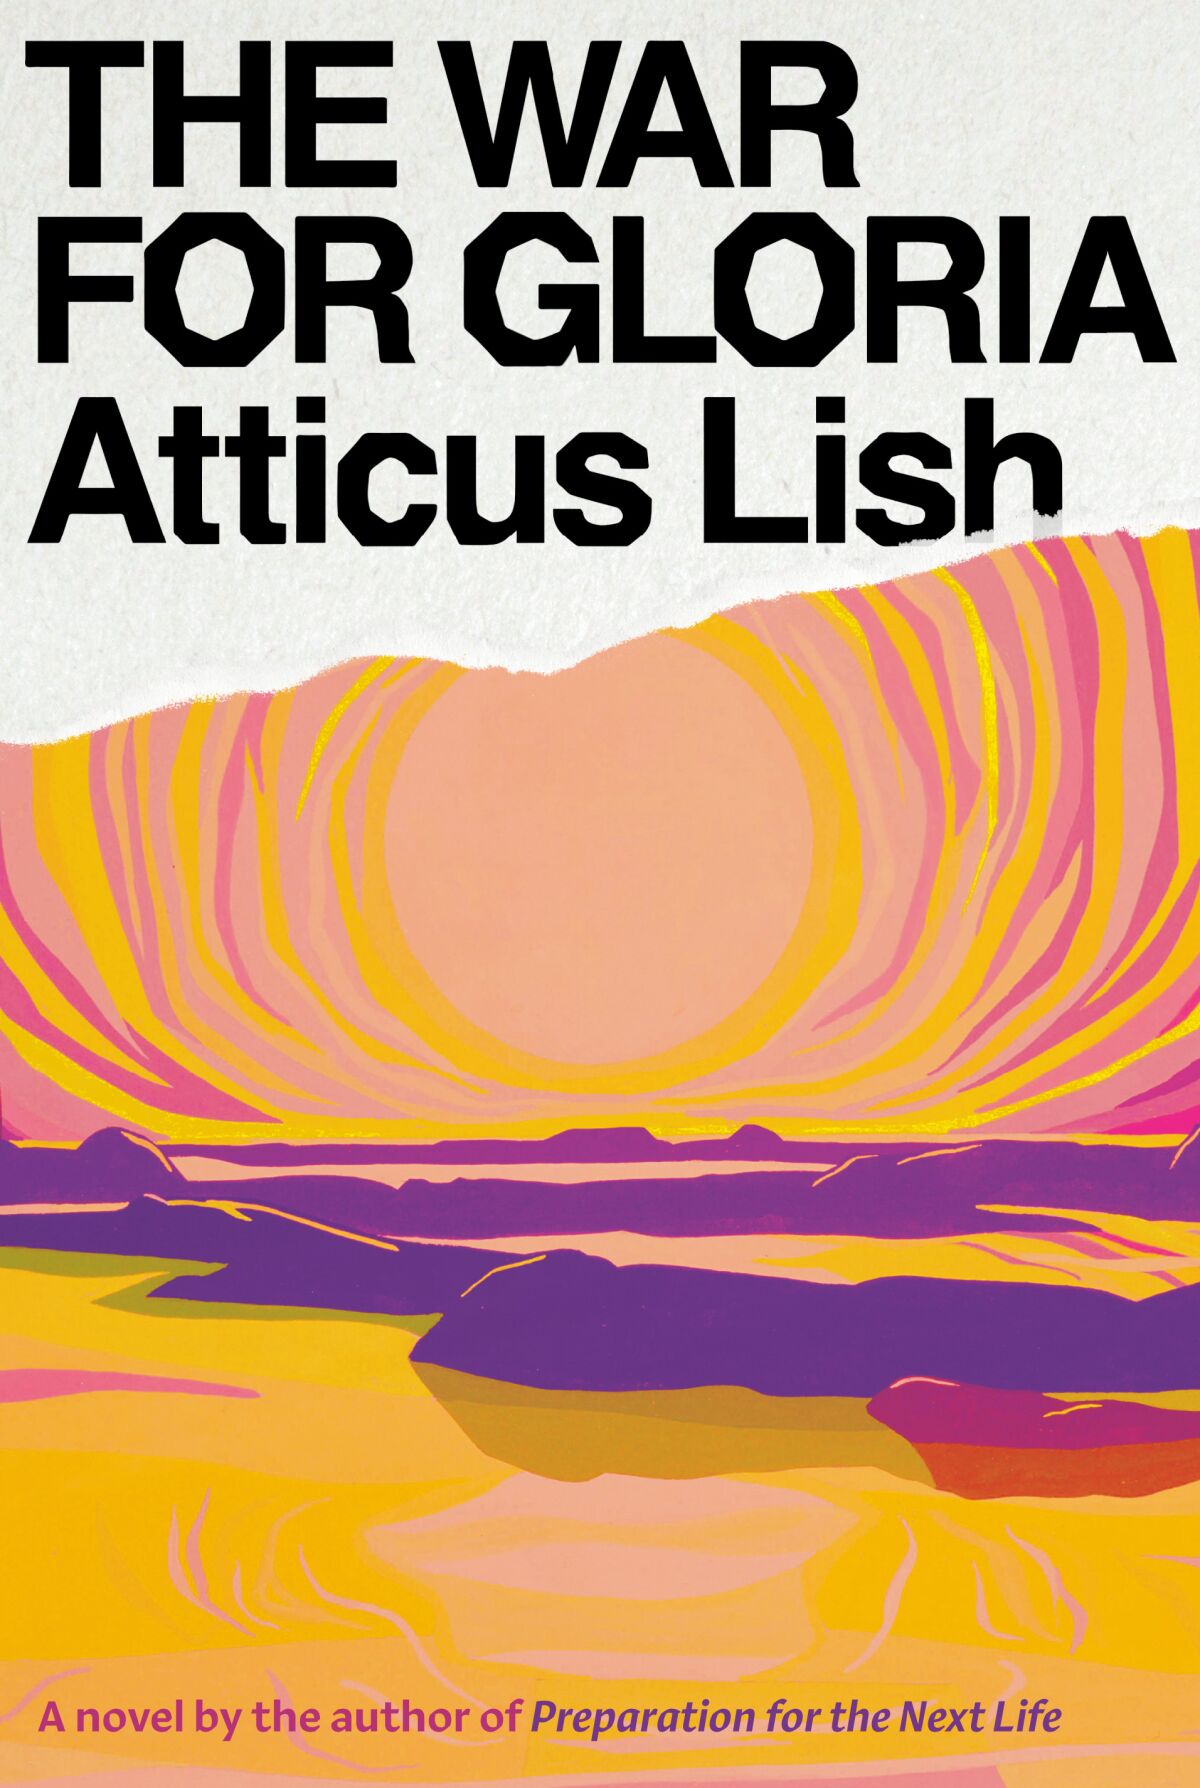 "The War for Gloria," by Atticus Lish